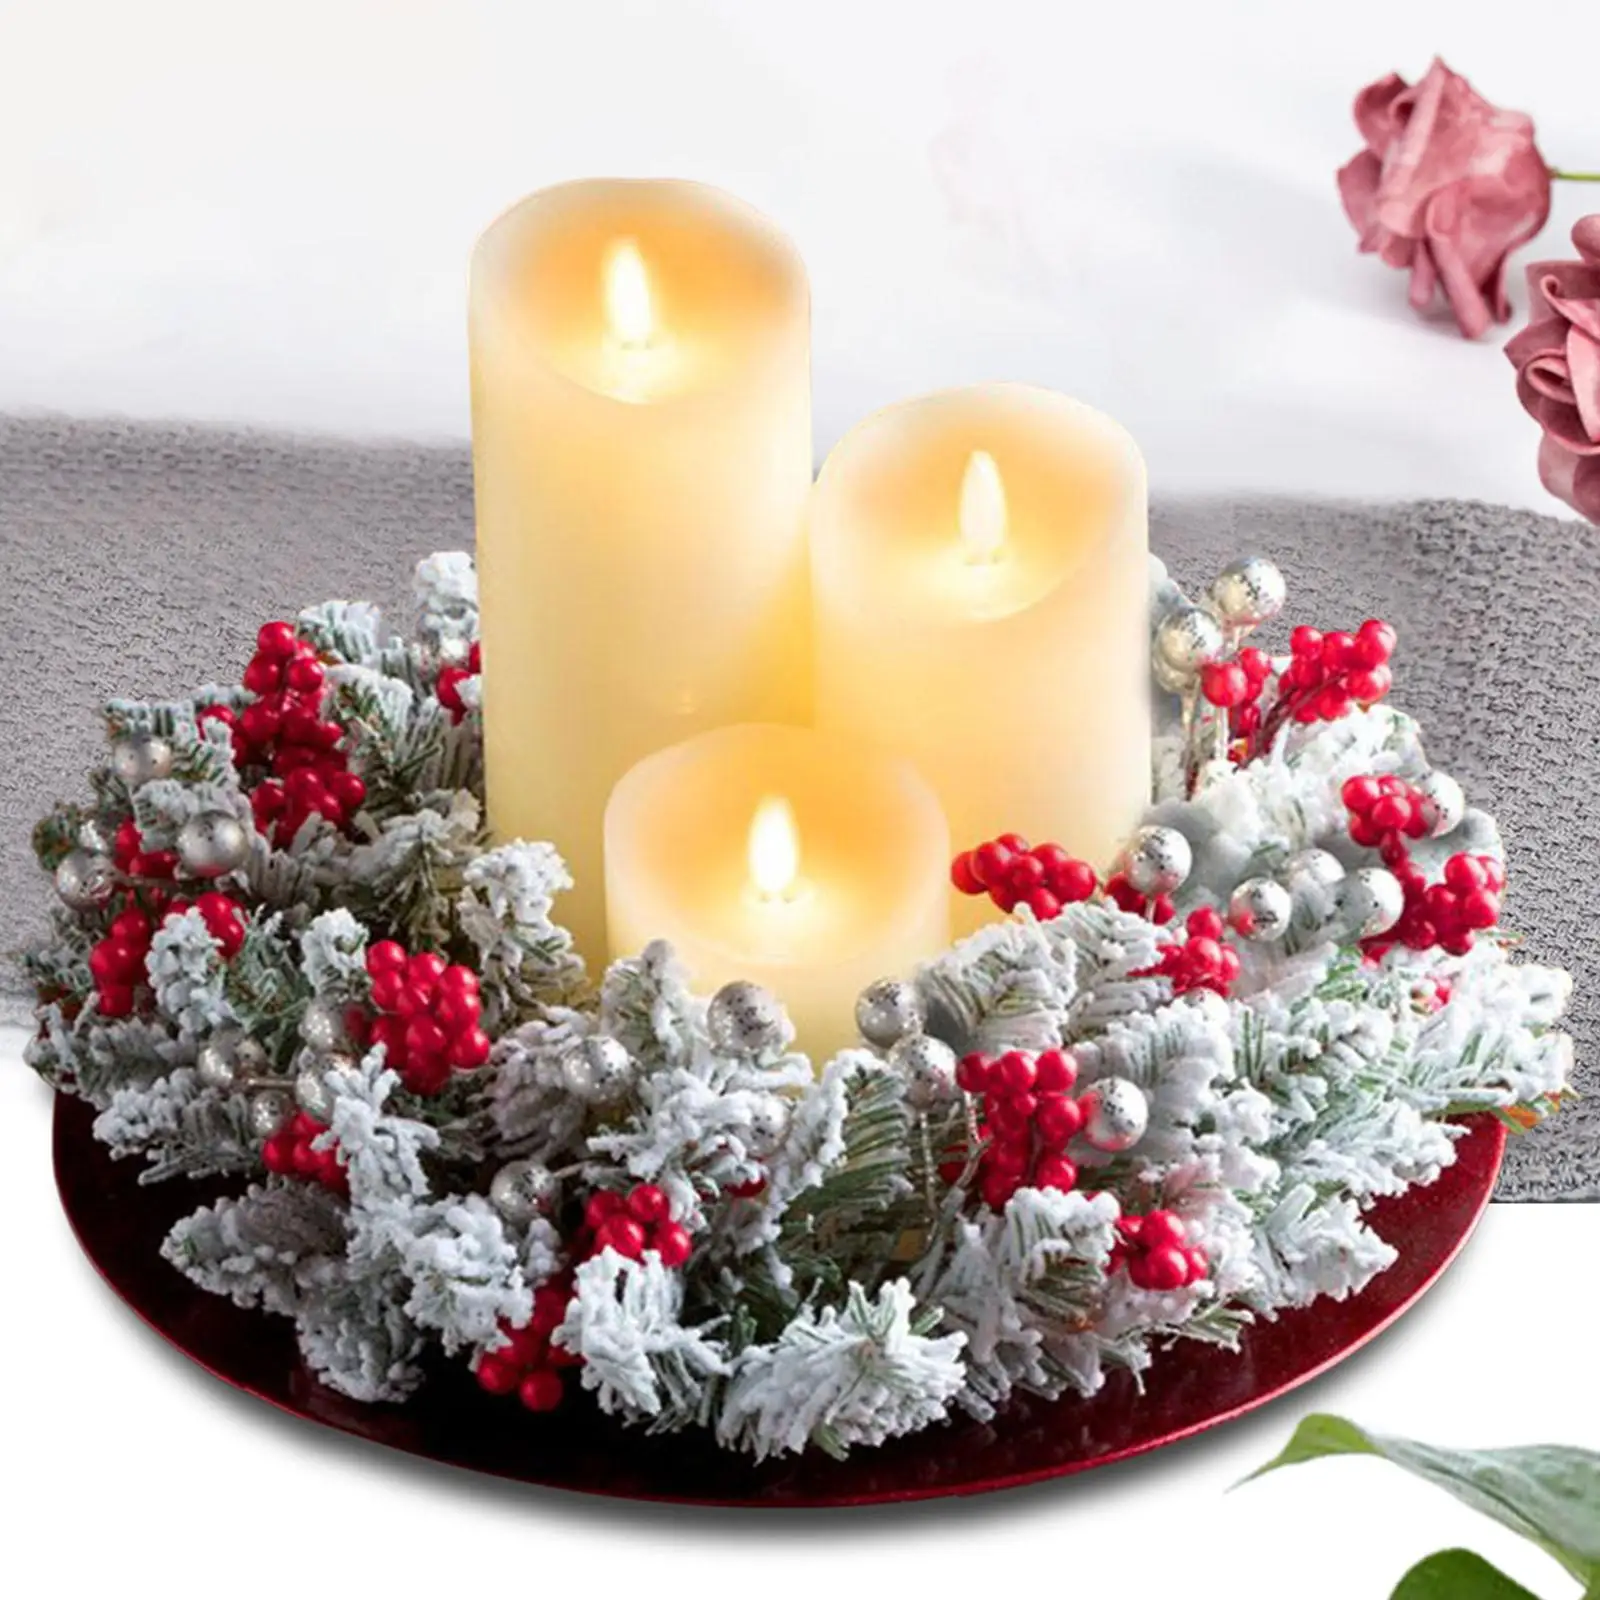 Christmas Candle Wreath Candles Holder Decorative Creative Candlestick Wreath for Table Centerpiece Parties Home Door Wedding